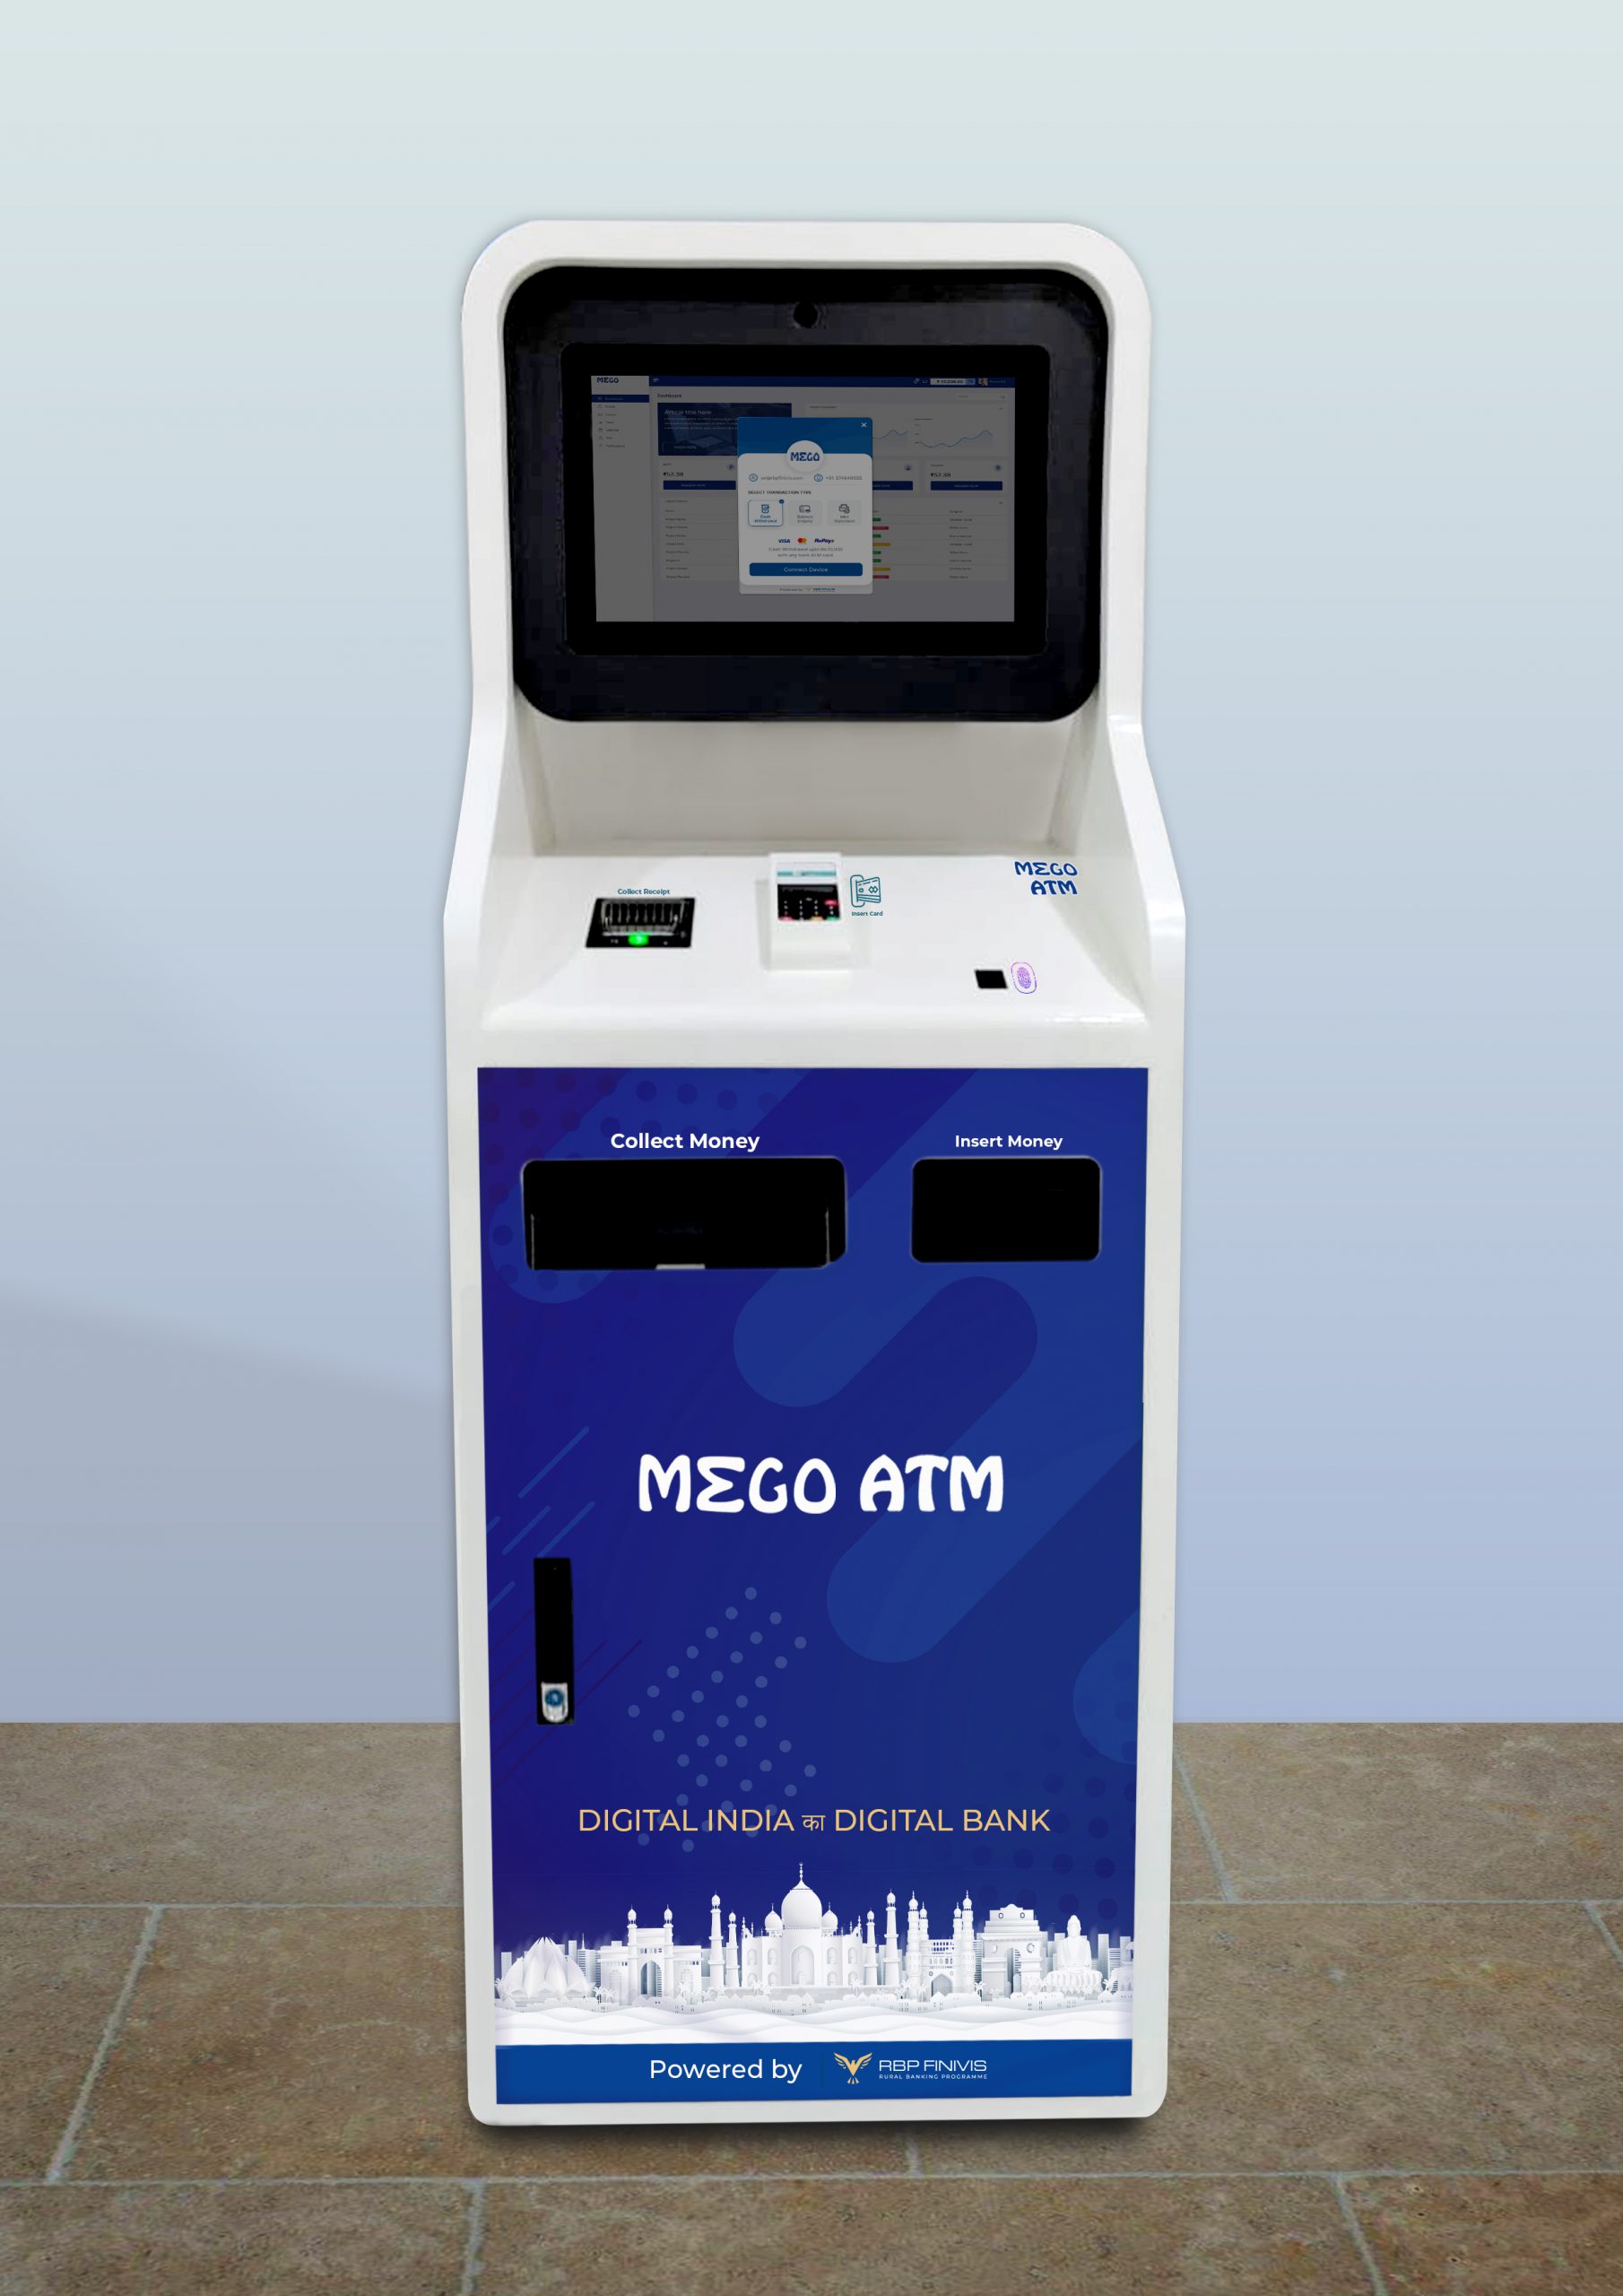 RBP Finivis extends its rural banking services with the launch of Mego ATM